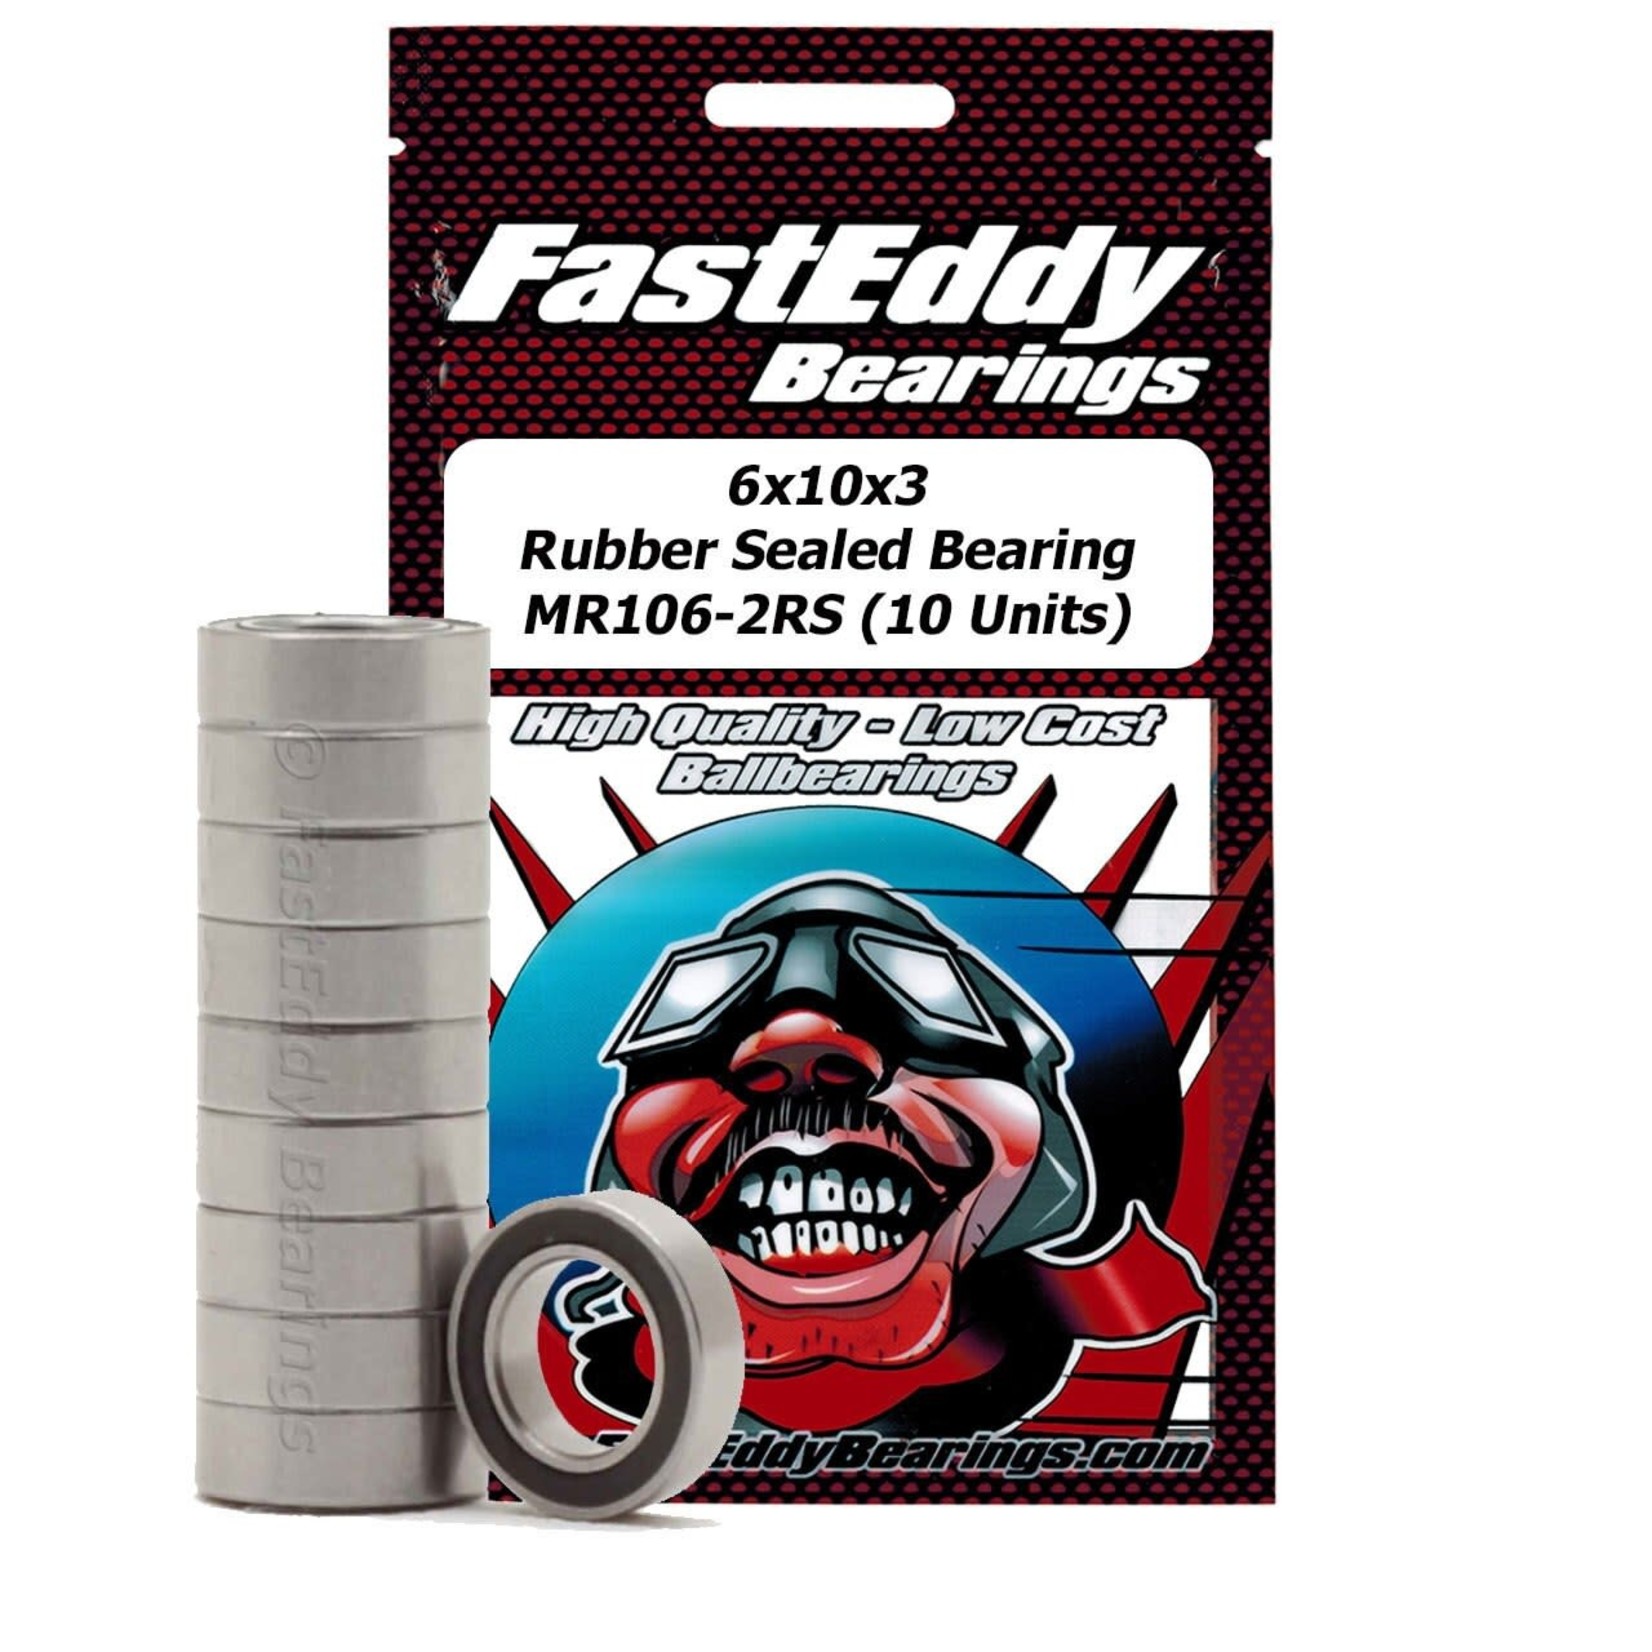 FASTEDDY 6x10x3mm Rubber Sealed Bearing (10) MR106-2RS